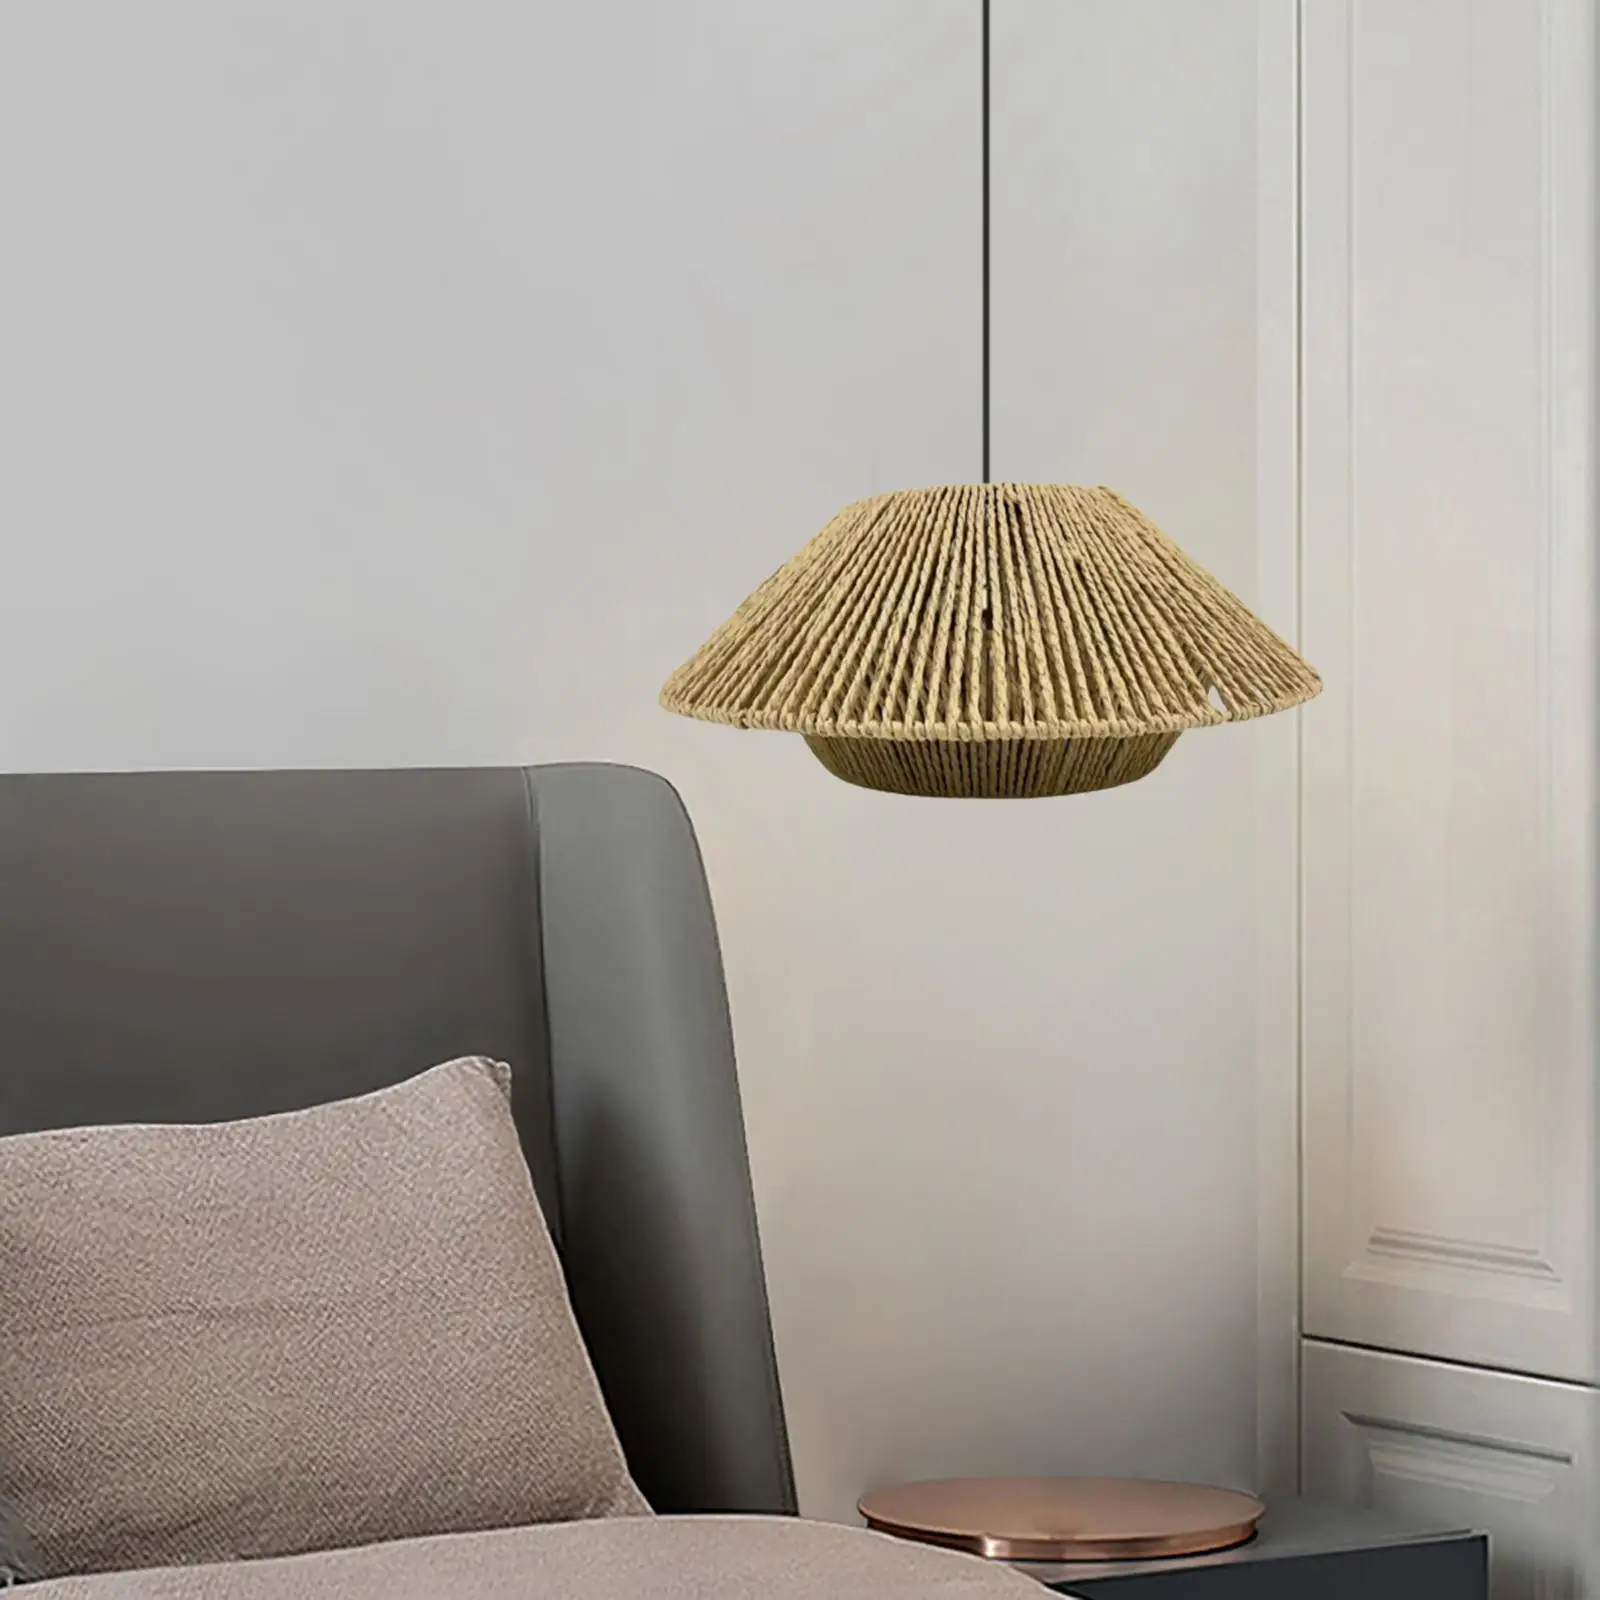 Ceiling Light Fixture Cover Ornament Droplight Floor Lamp Pendant Lamp Shades Woven Rope Lampshade for Restaurant Living Room